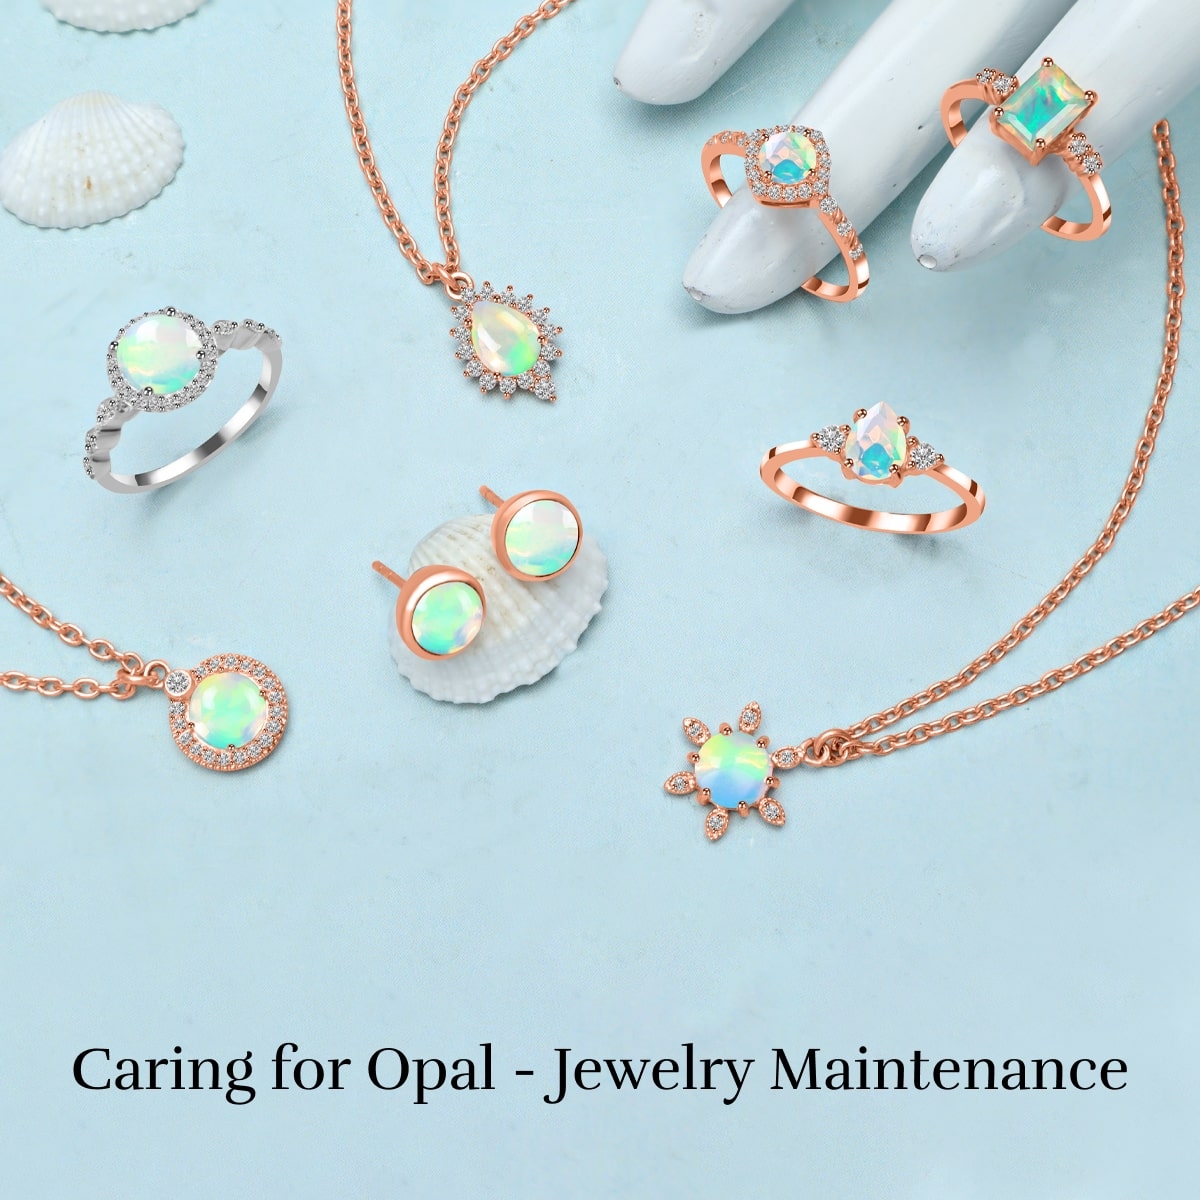 Caring for Opal Jewelry